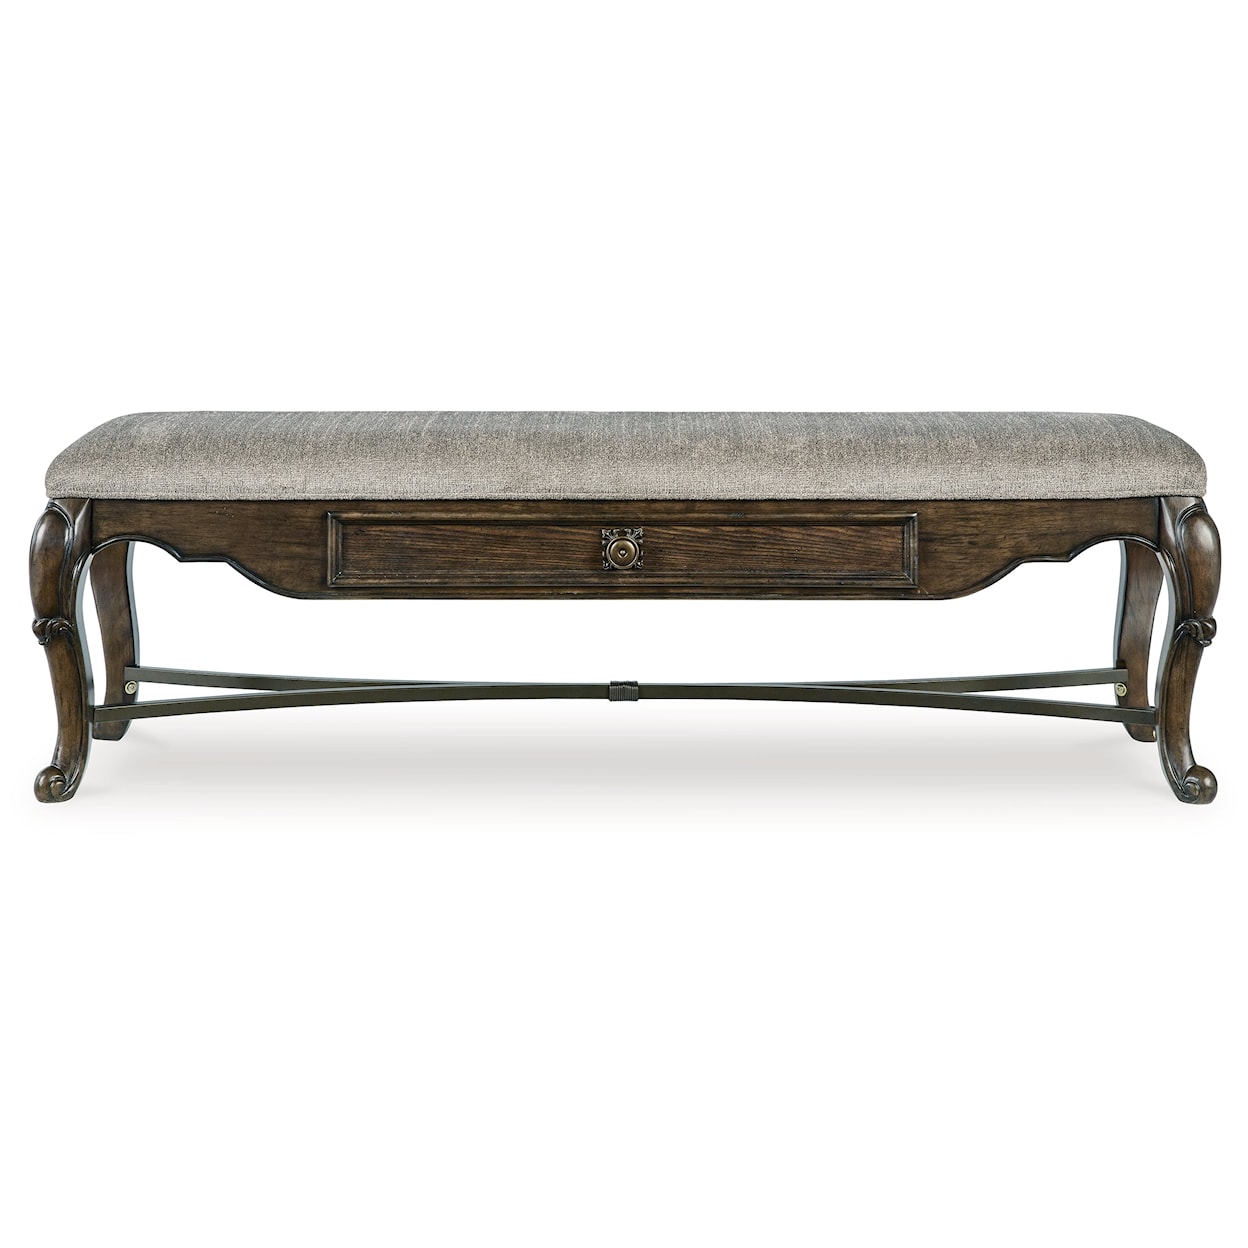 Signature Design by Ashley Furniture Maylee Upholstered Storage Bench